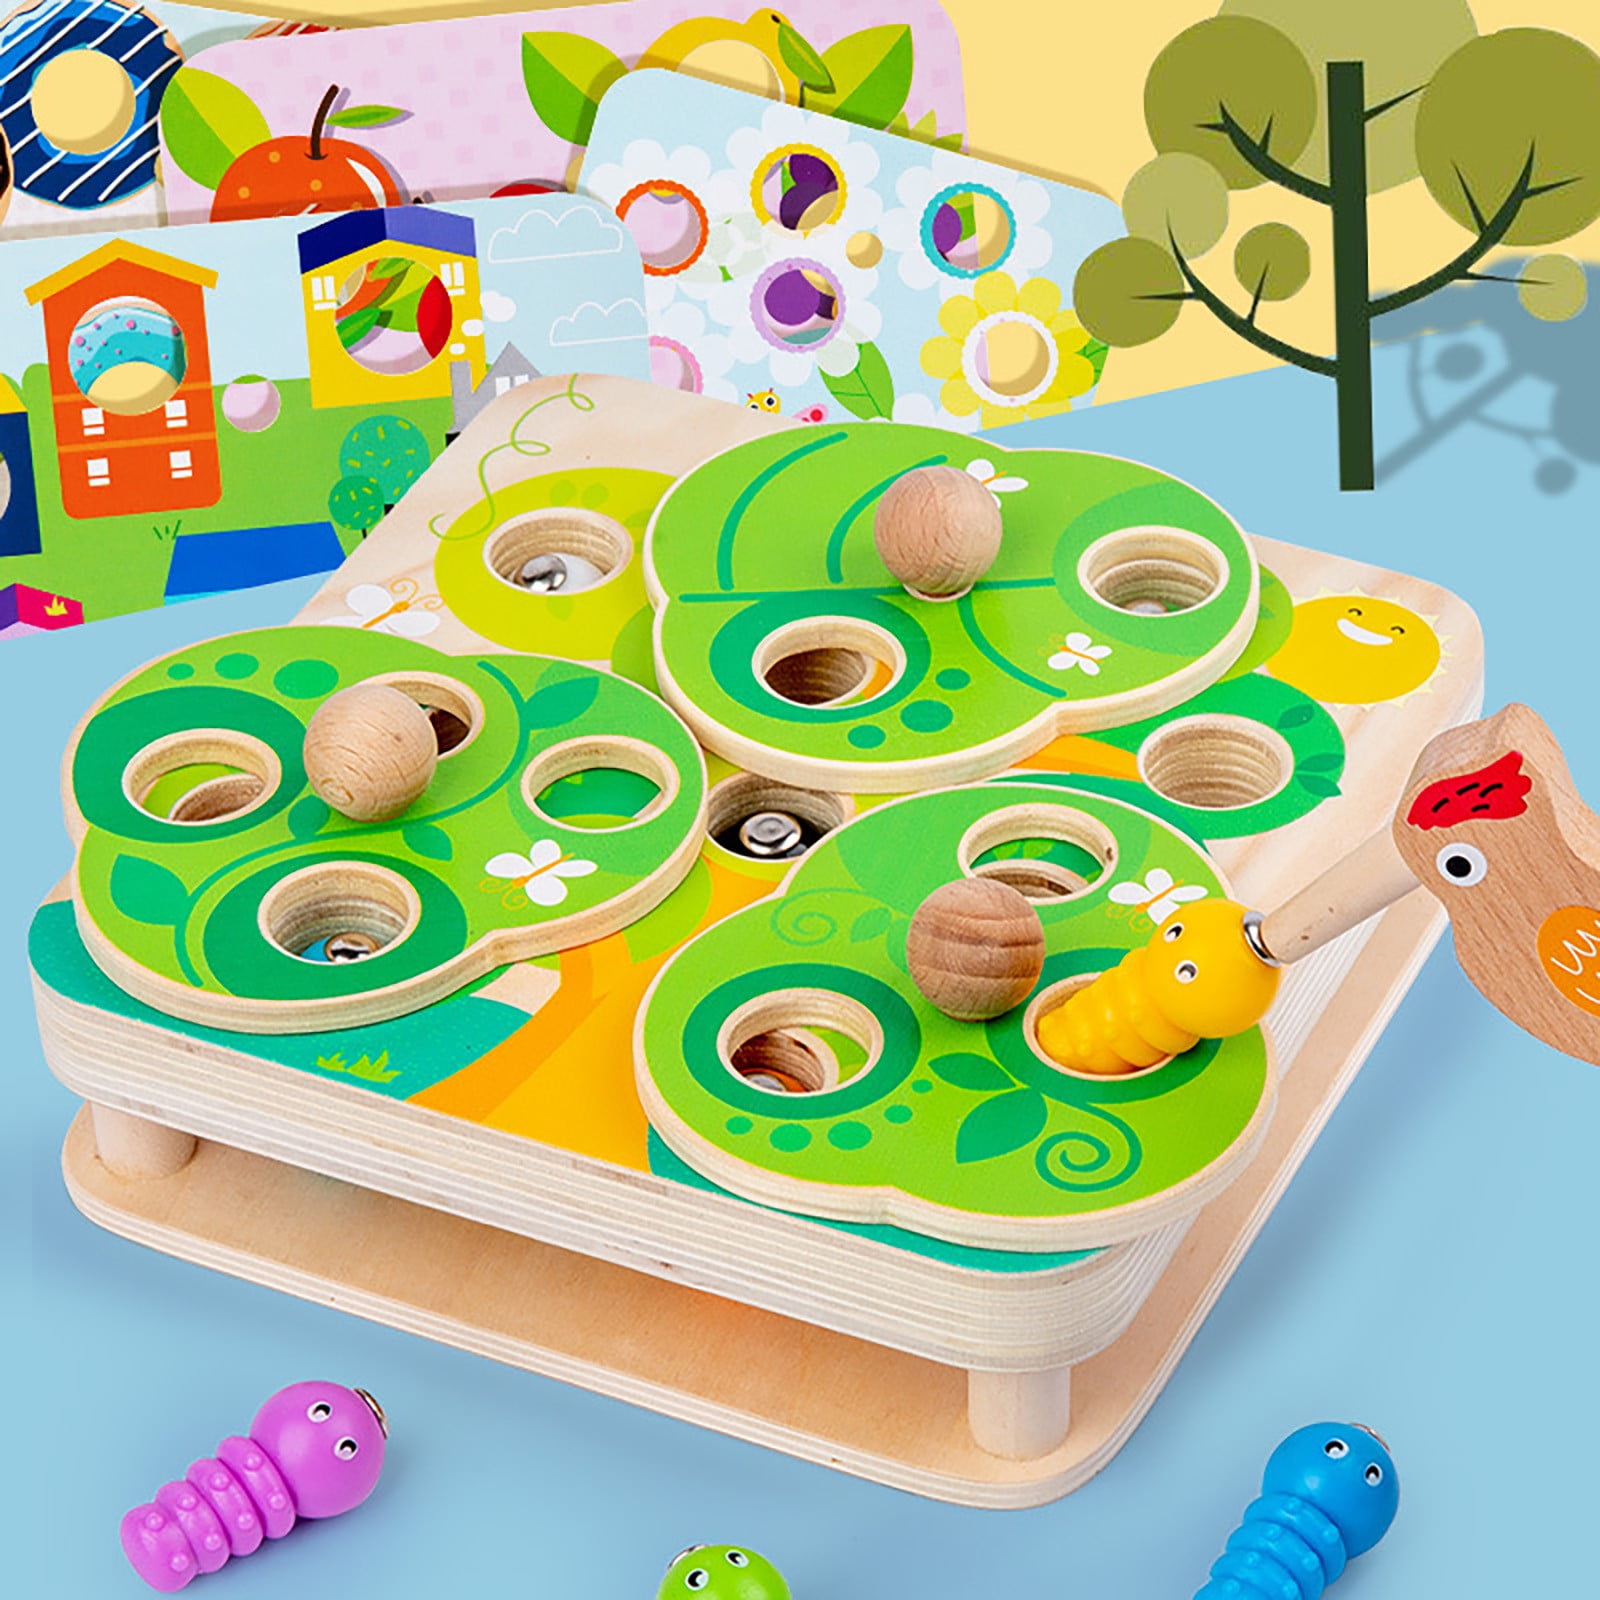 HUAhuako Catch Caterpillar Worms Game Wooden Magnetic Woodpecker Educational Kids Toy Ages 2 Years Old and Up 